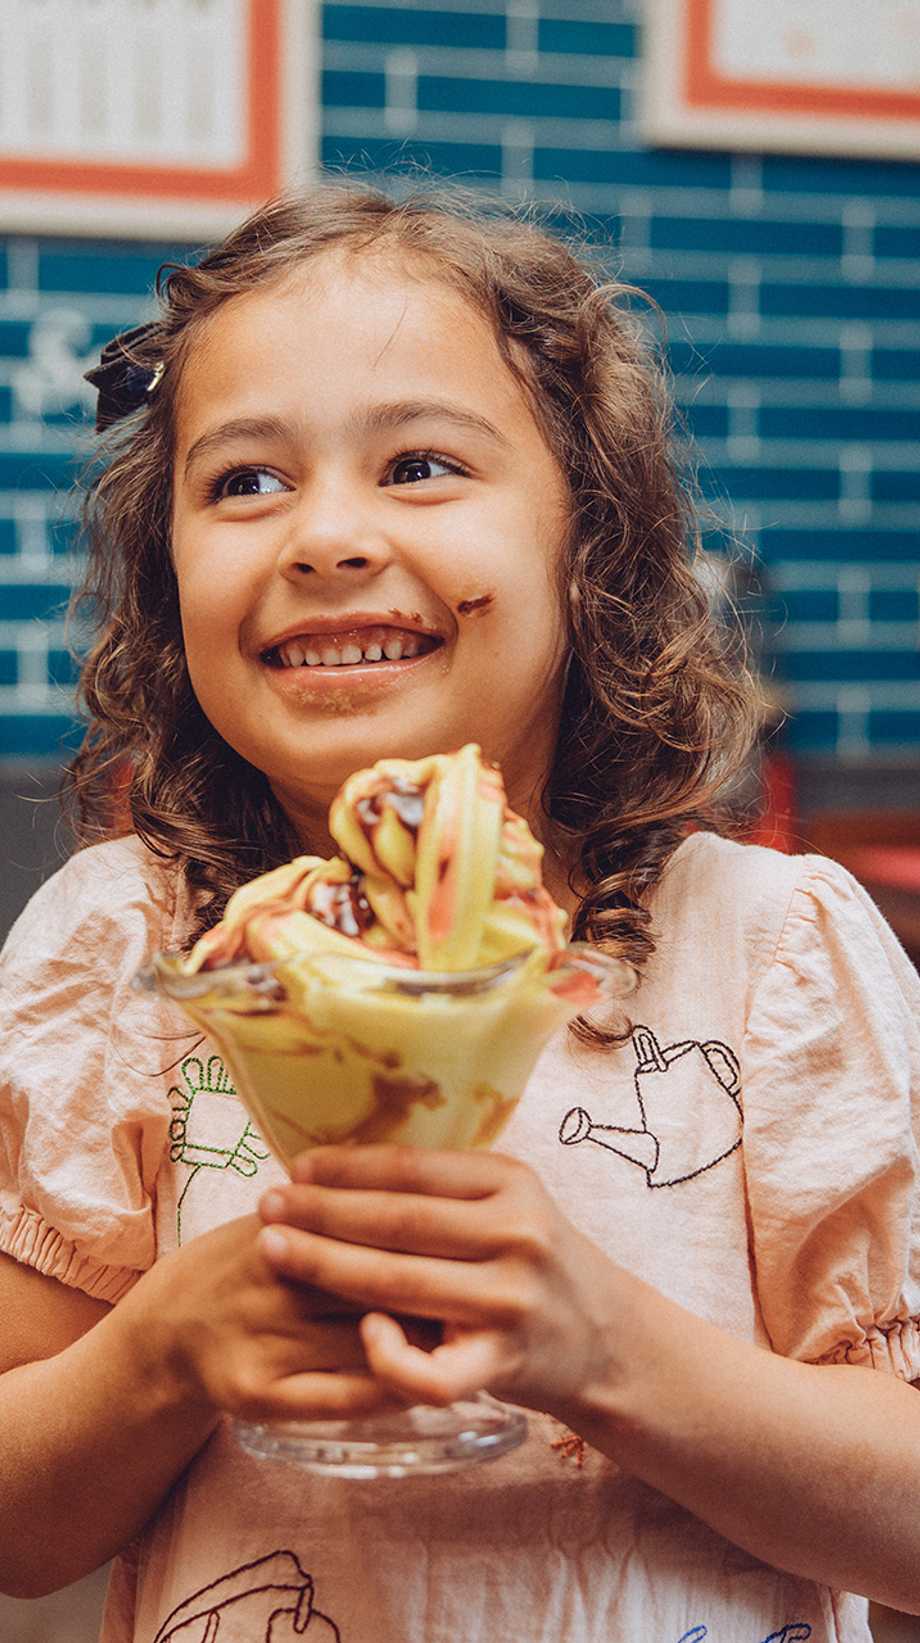 A young girl with chocolate on her cheek is smiling in front of an ice-cream sundae.